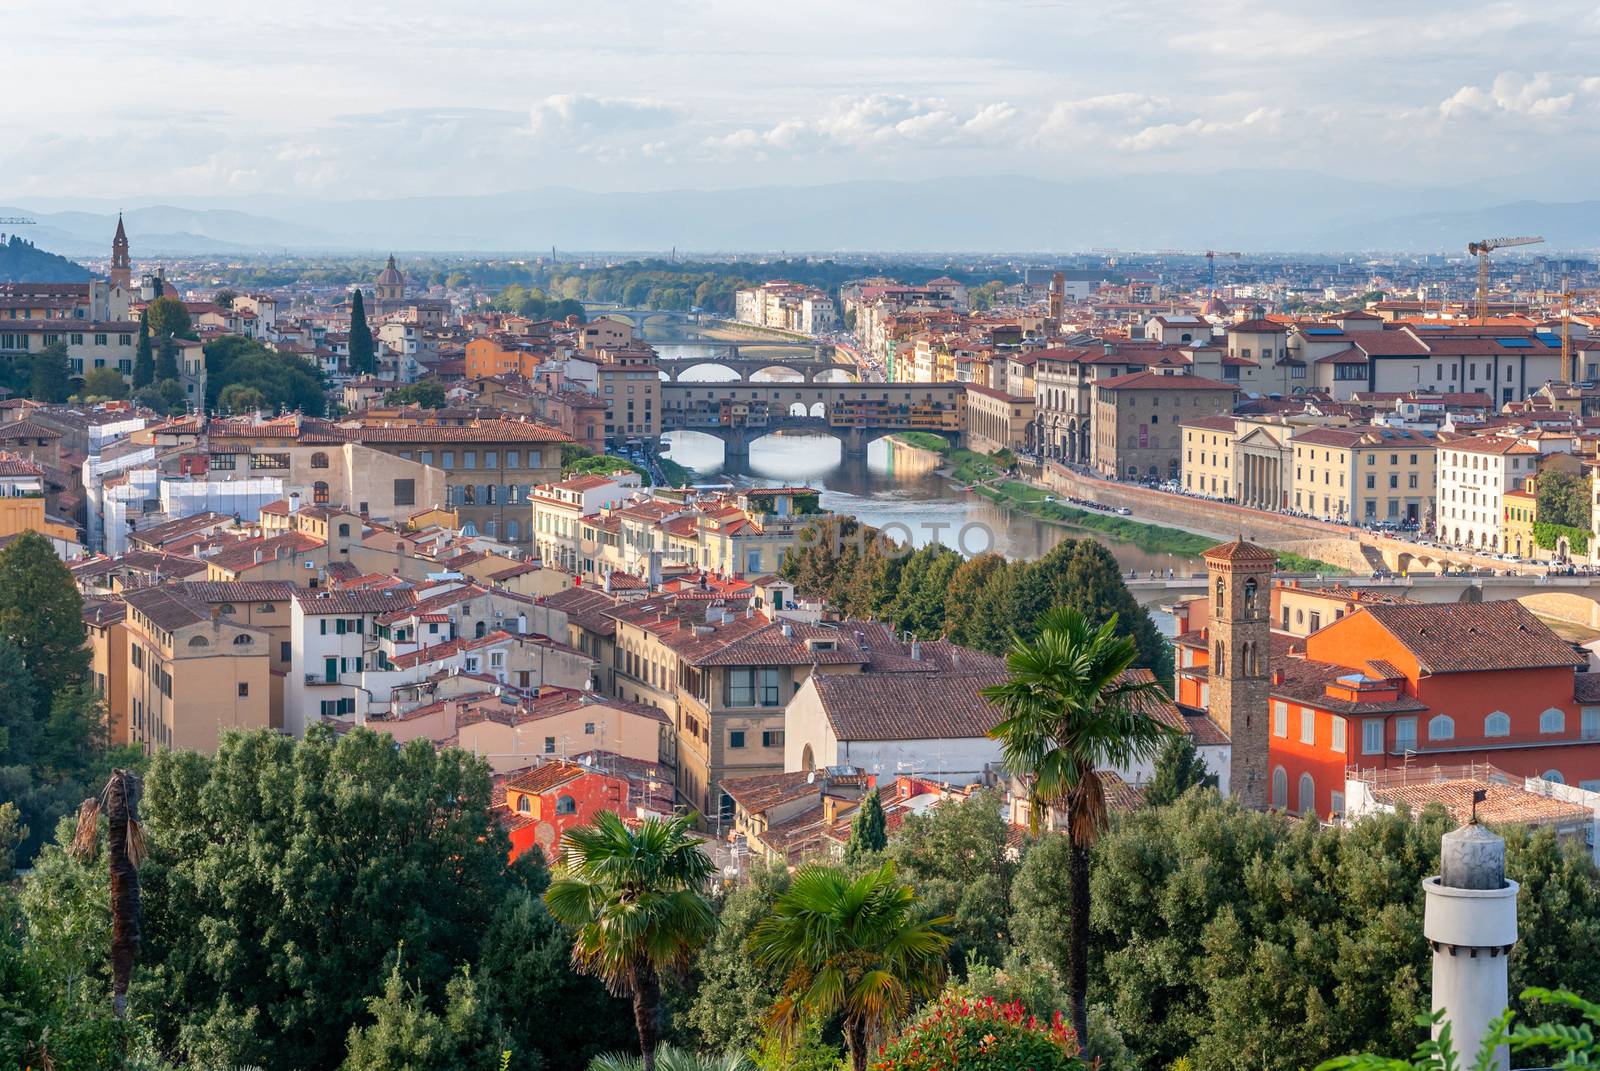 Beautiful cityscape skyline of Firenze Florence , with the bridges over the river Arno. Italy